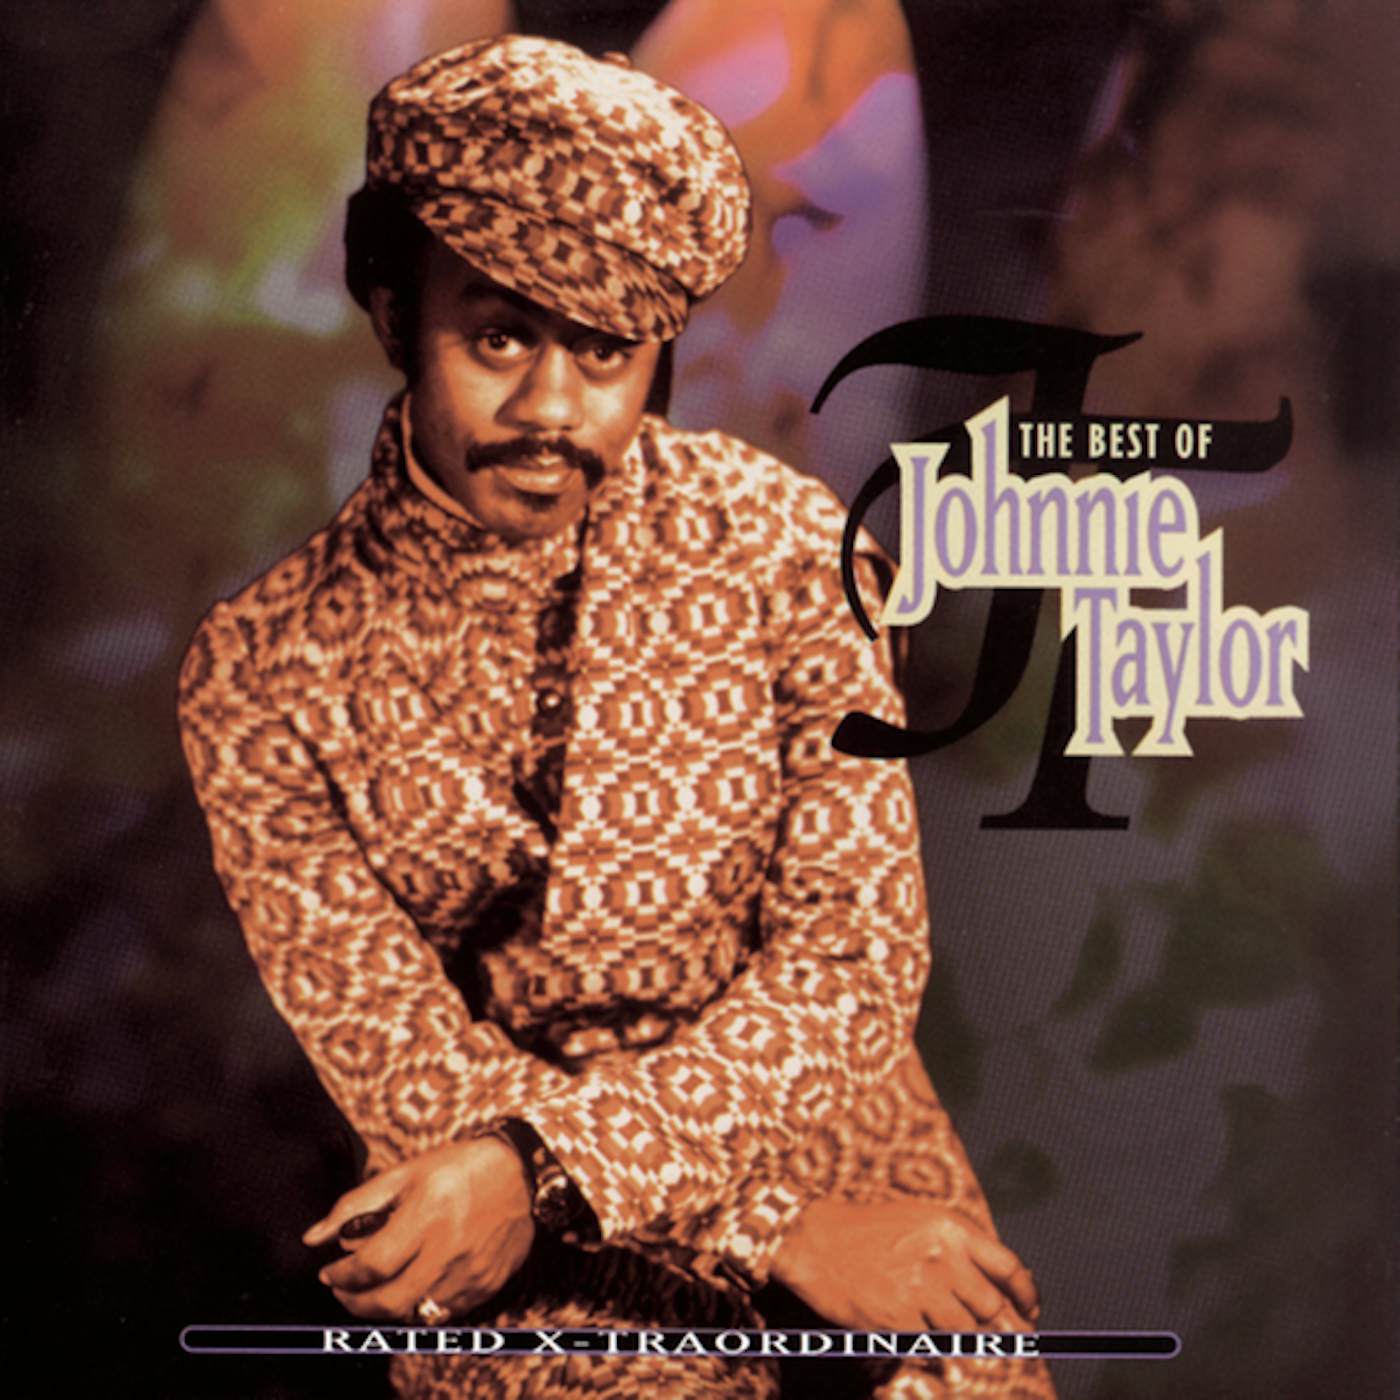 Johnnie Taylor RATED X-TRAORDINAIRE: BEST OF CD